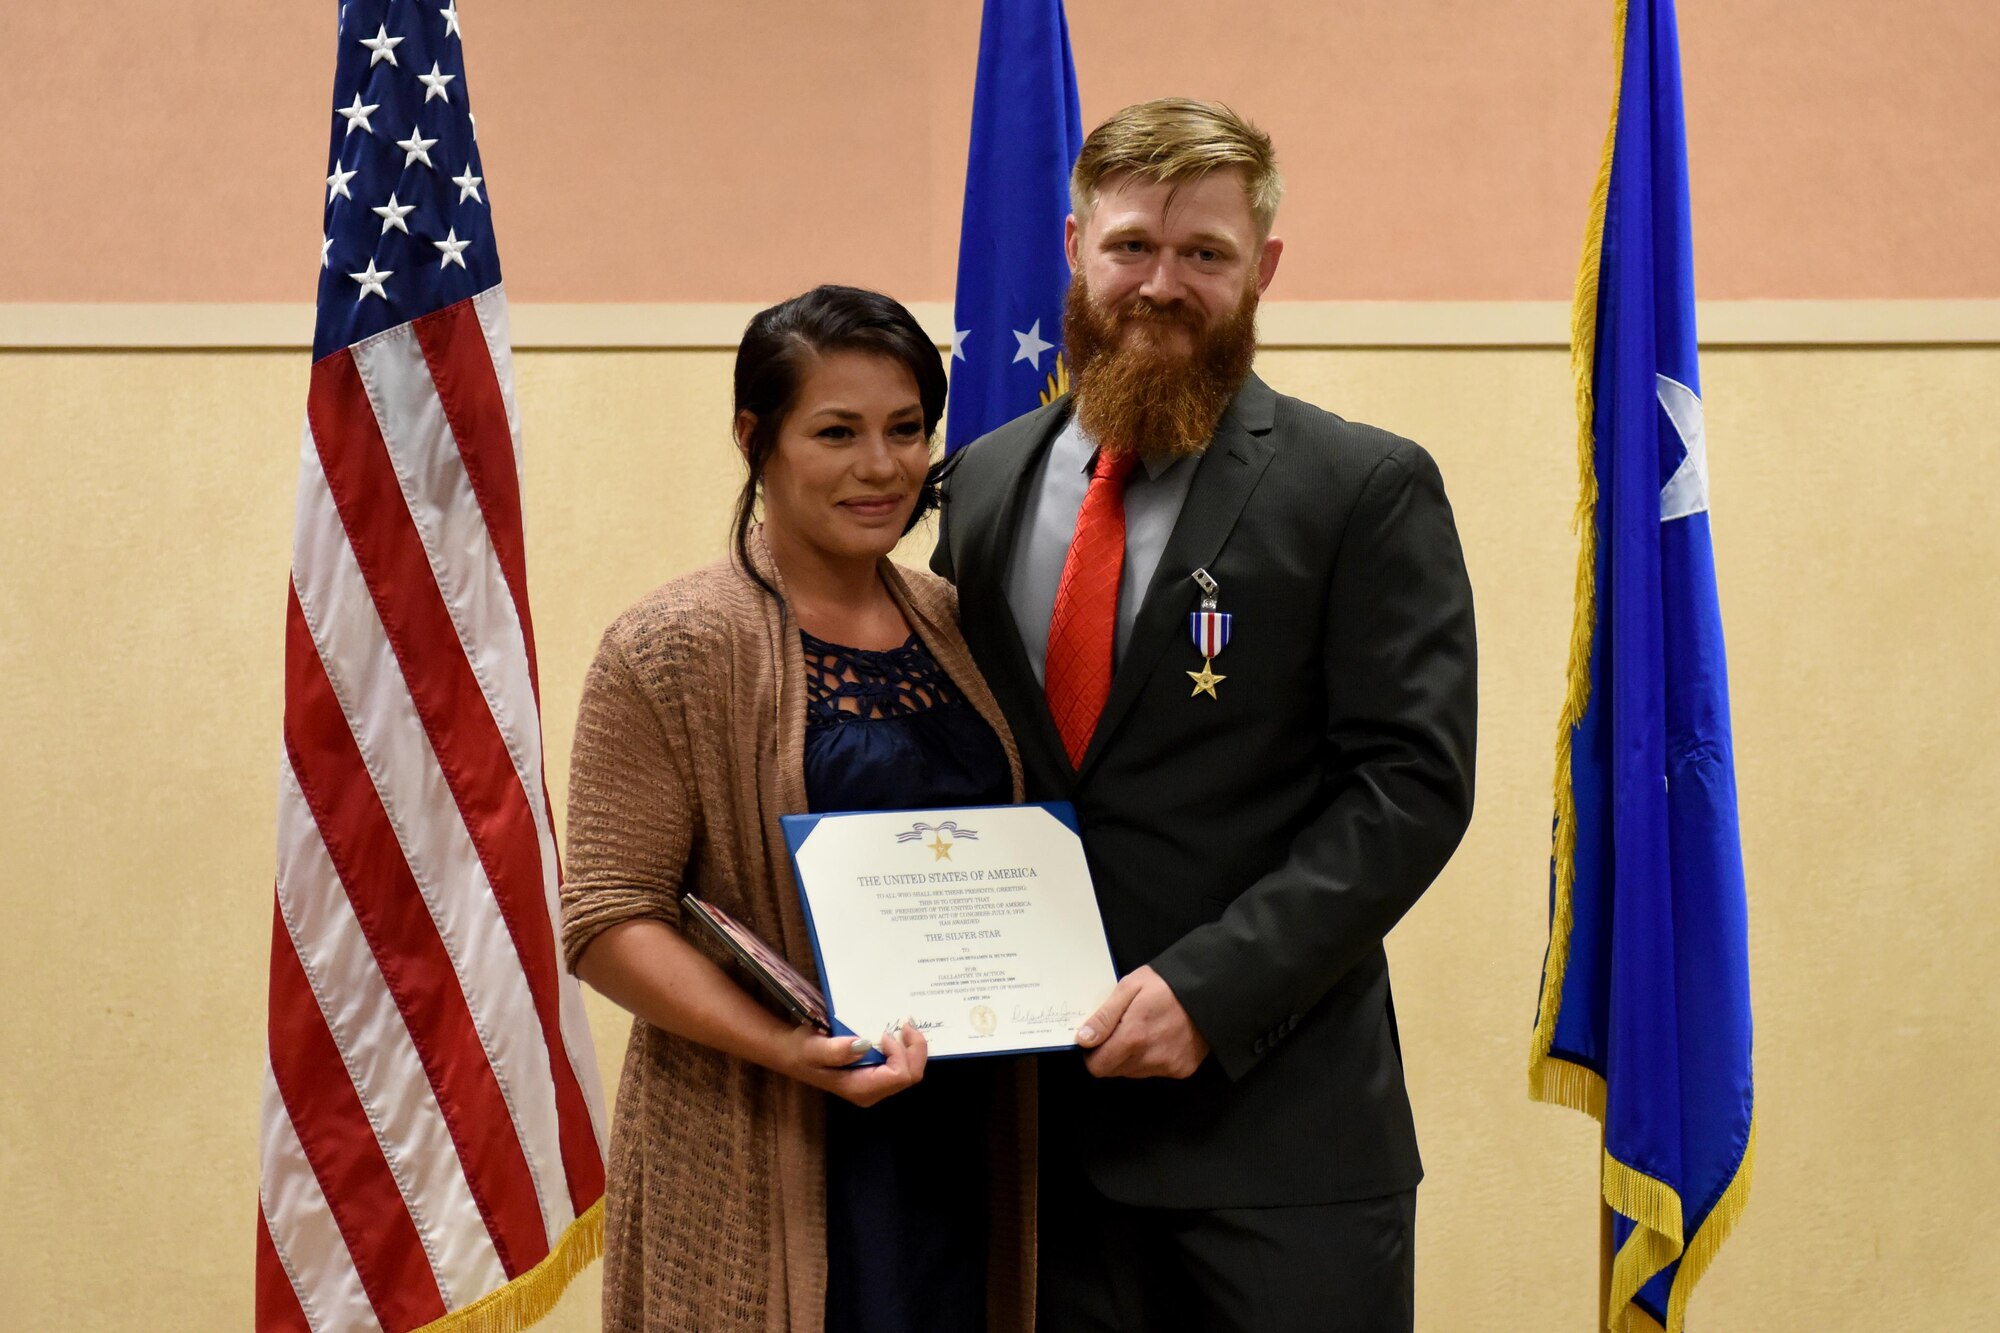 Retired Staff Sgt. Benjamin Hutchins, 18th Air Support Operations Group joint terminal attack controller, and his wife, Heather Hutchins, pose for a photo after a ceremony, Nov. 4, 2016, at Pope Army Airfield, North Carolina. Hutchins received the Silver Star Medal for his actions in spite of imminent danger while facing hostile forces during OPERATION ENDURING FREEDOM in 2009. (U.S. Air Force photo by Airman Miranda A. Loera)